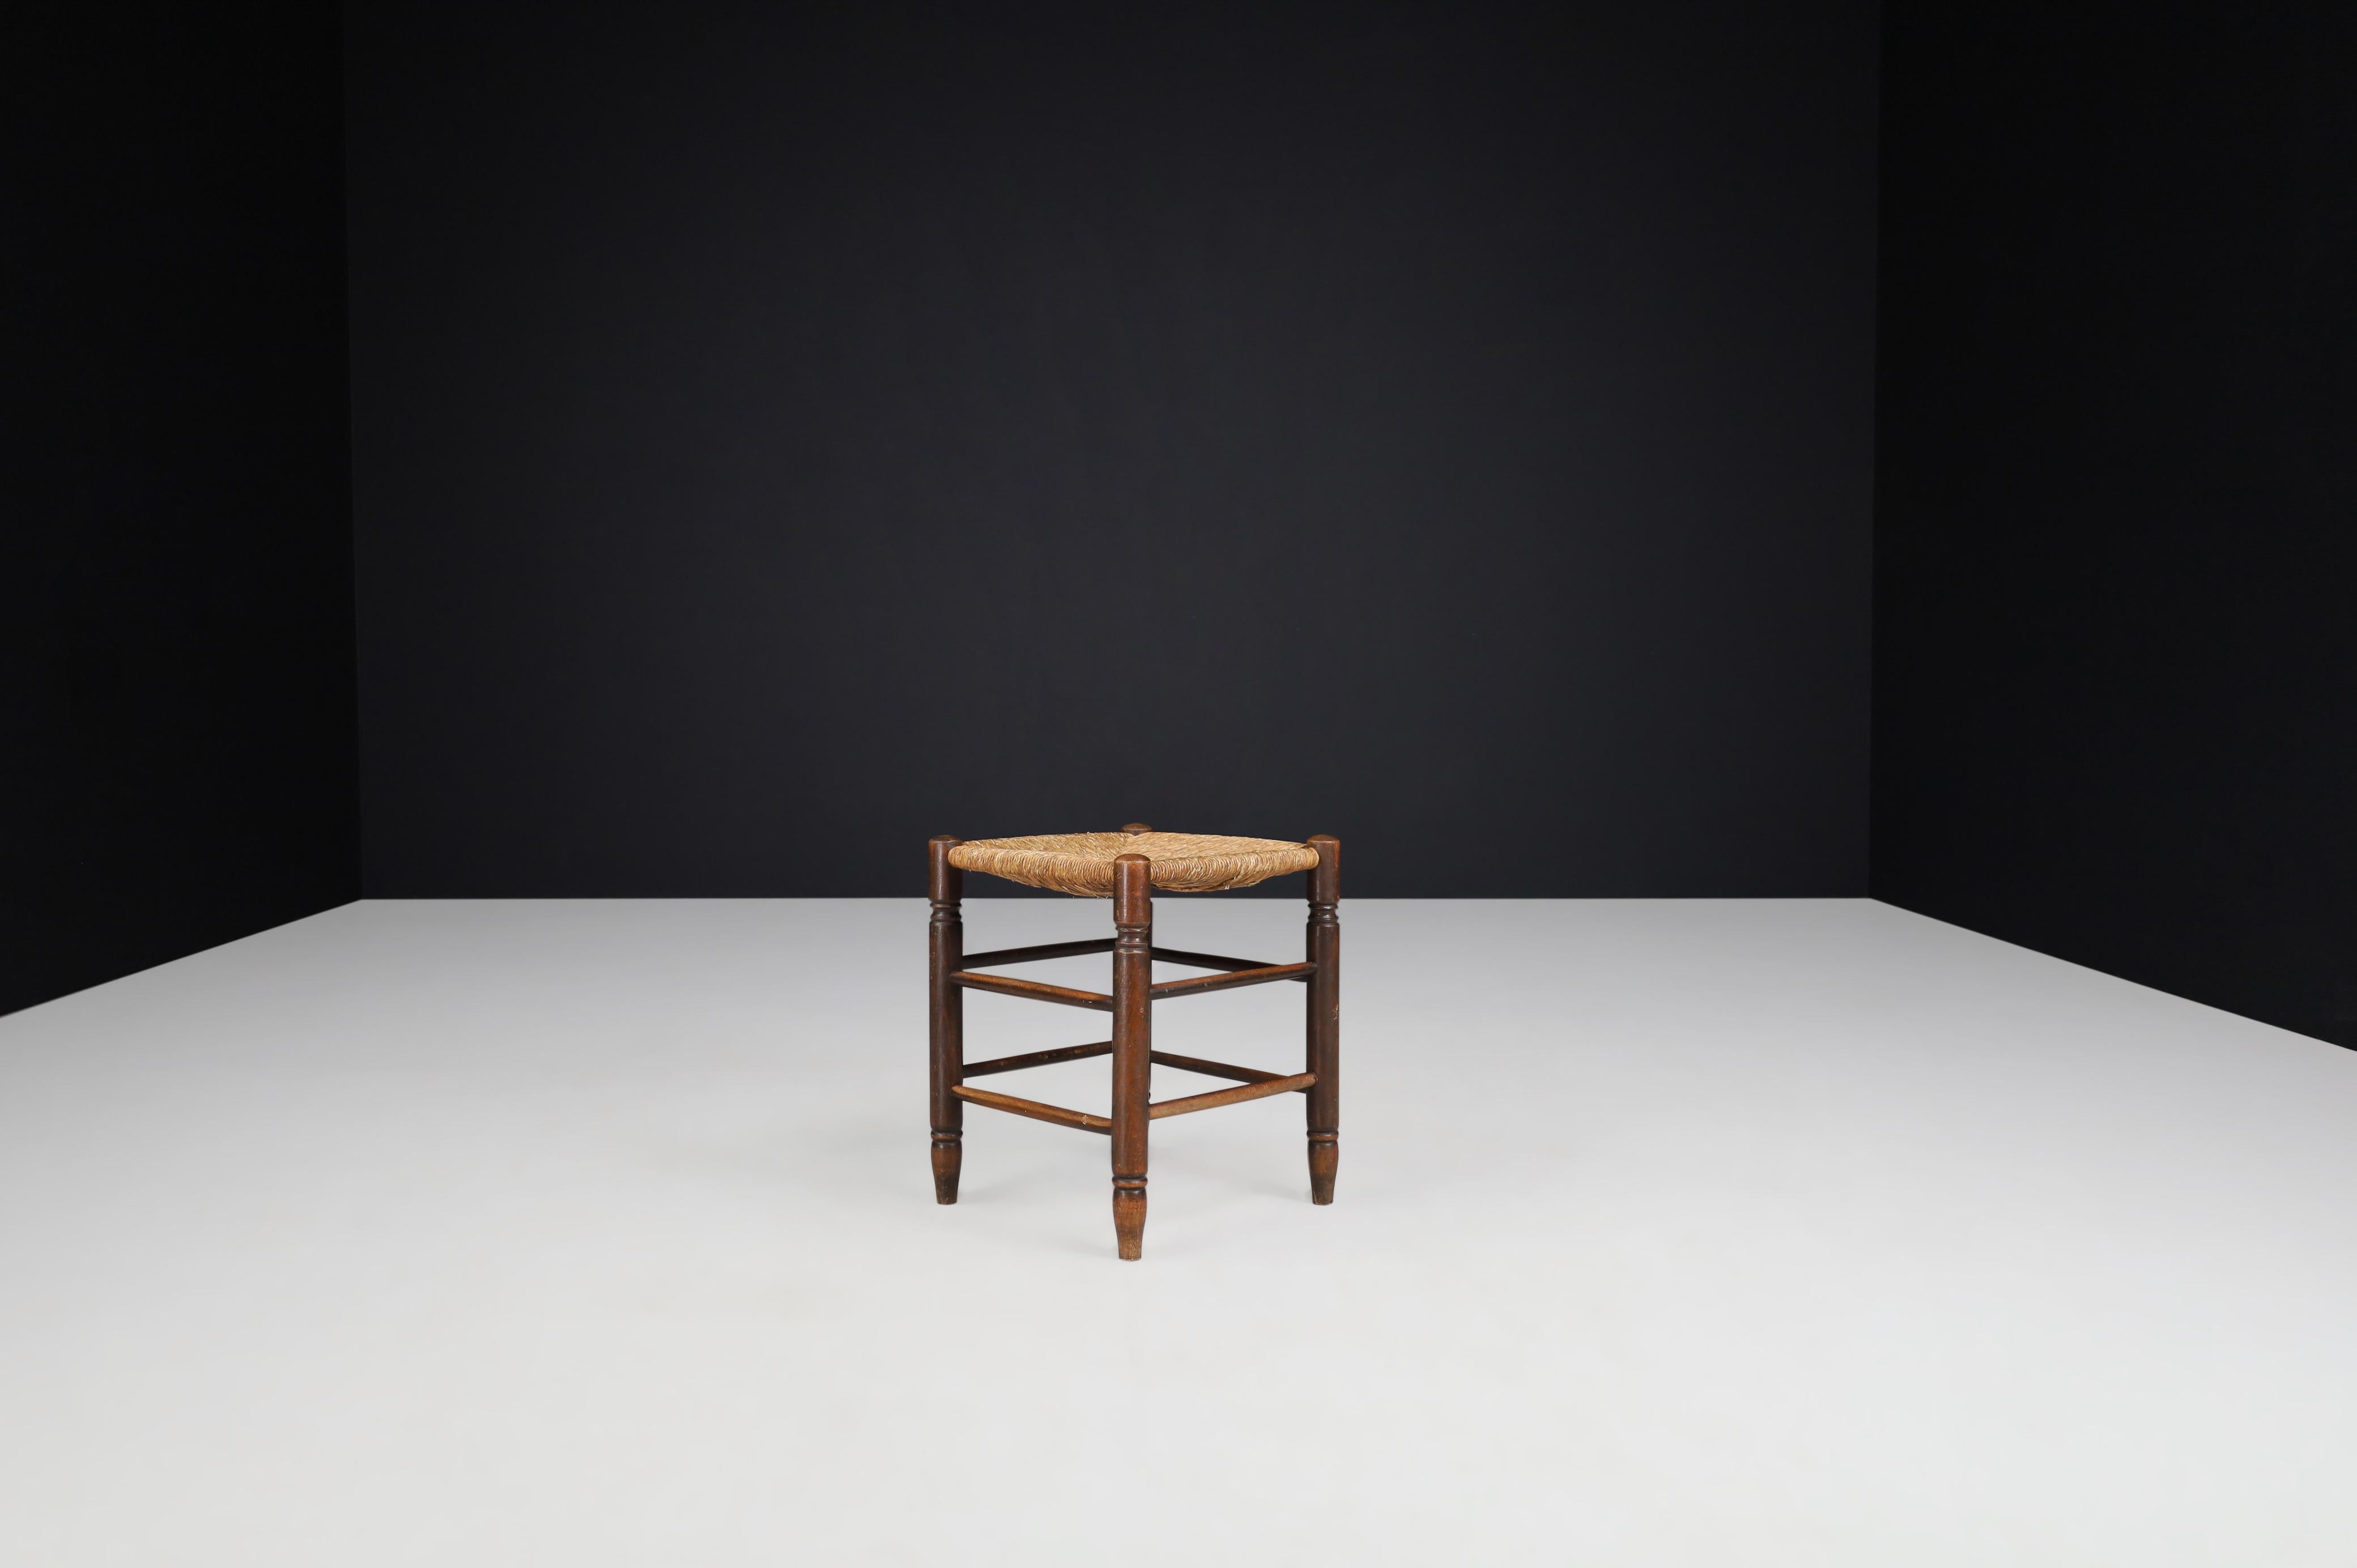 Tabouret in the style of Charlotte Perriand, France, 1950s.

This solid oak Tabouret shows a lovely natural patina, is in excellent original condition, and has a great patina and natural wear to the wood and rush. This stool would be an